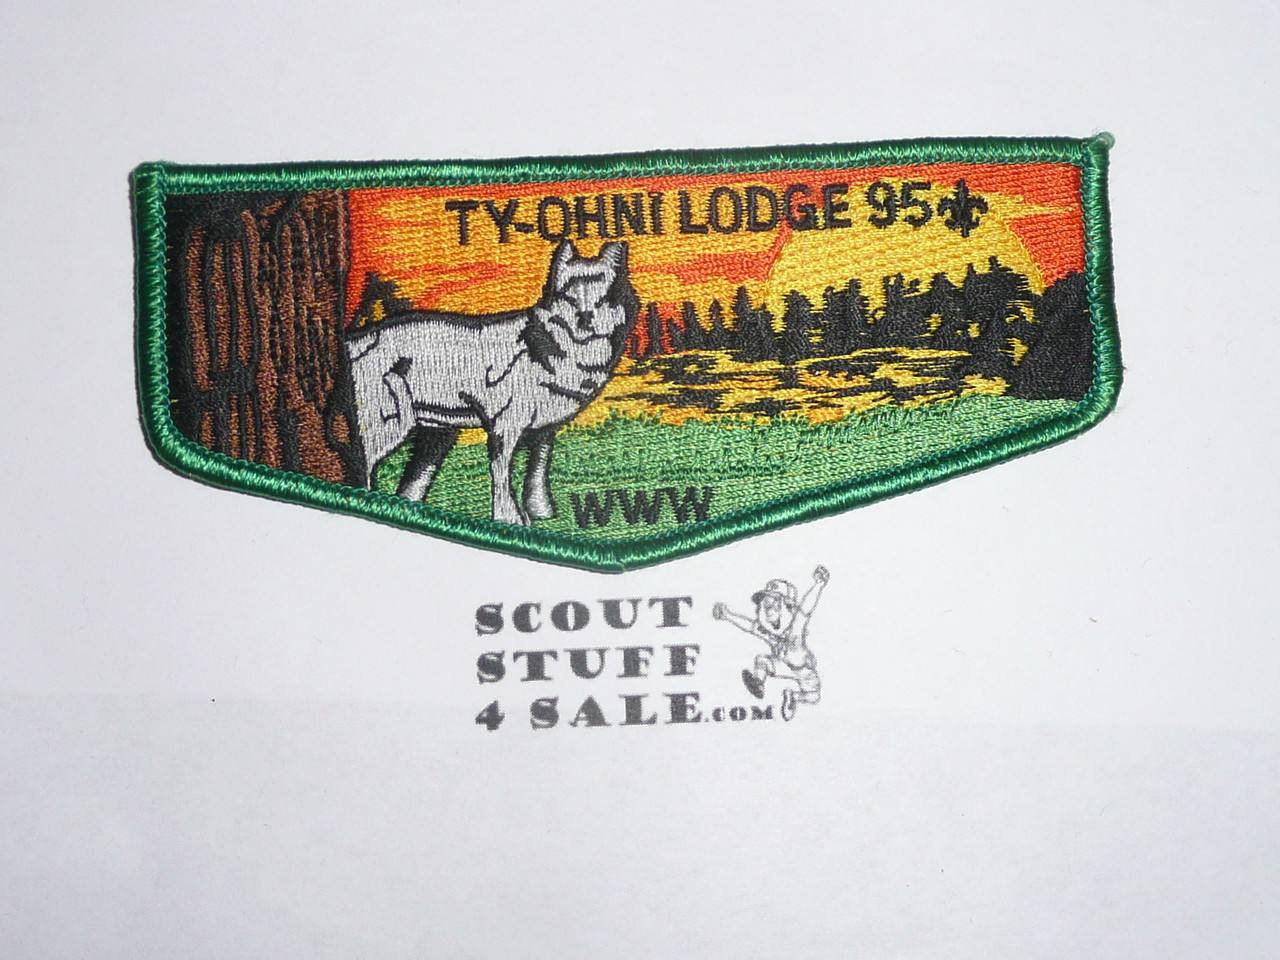 Order of the Arrow Lodge #95 Ty-Ohni s20 Flap Patch